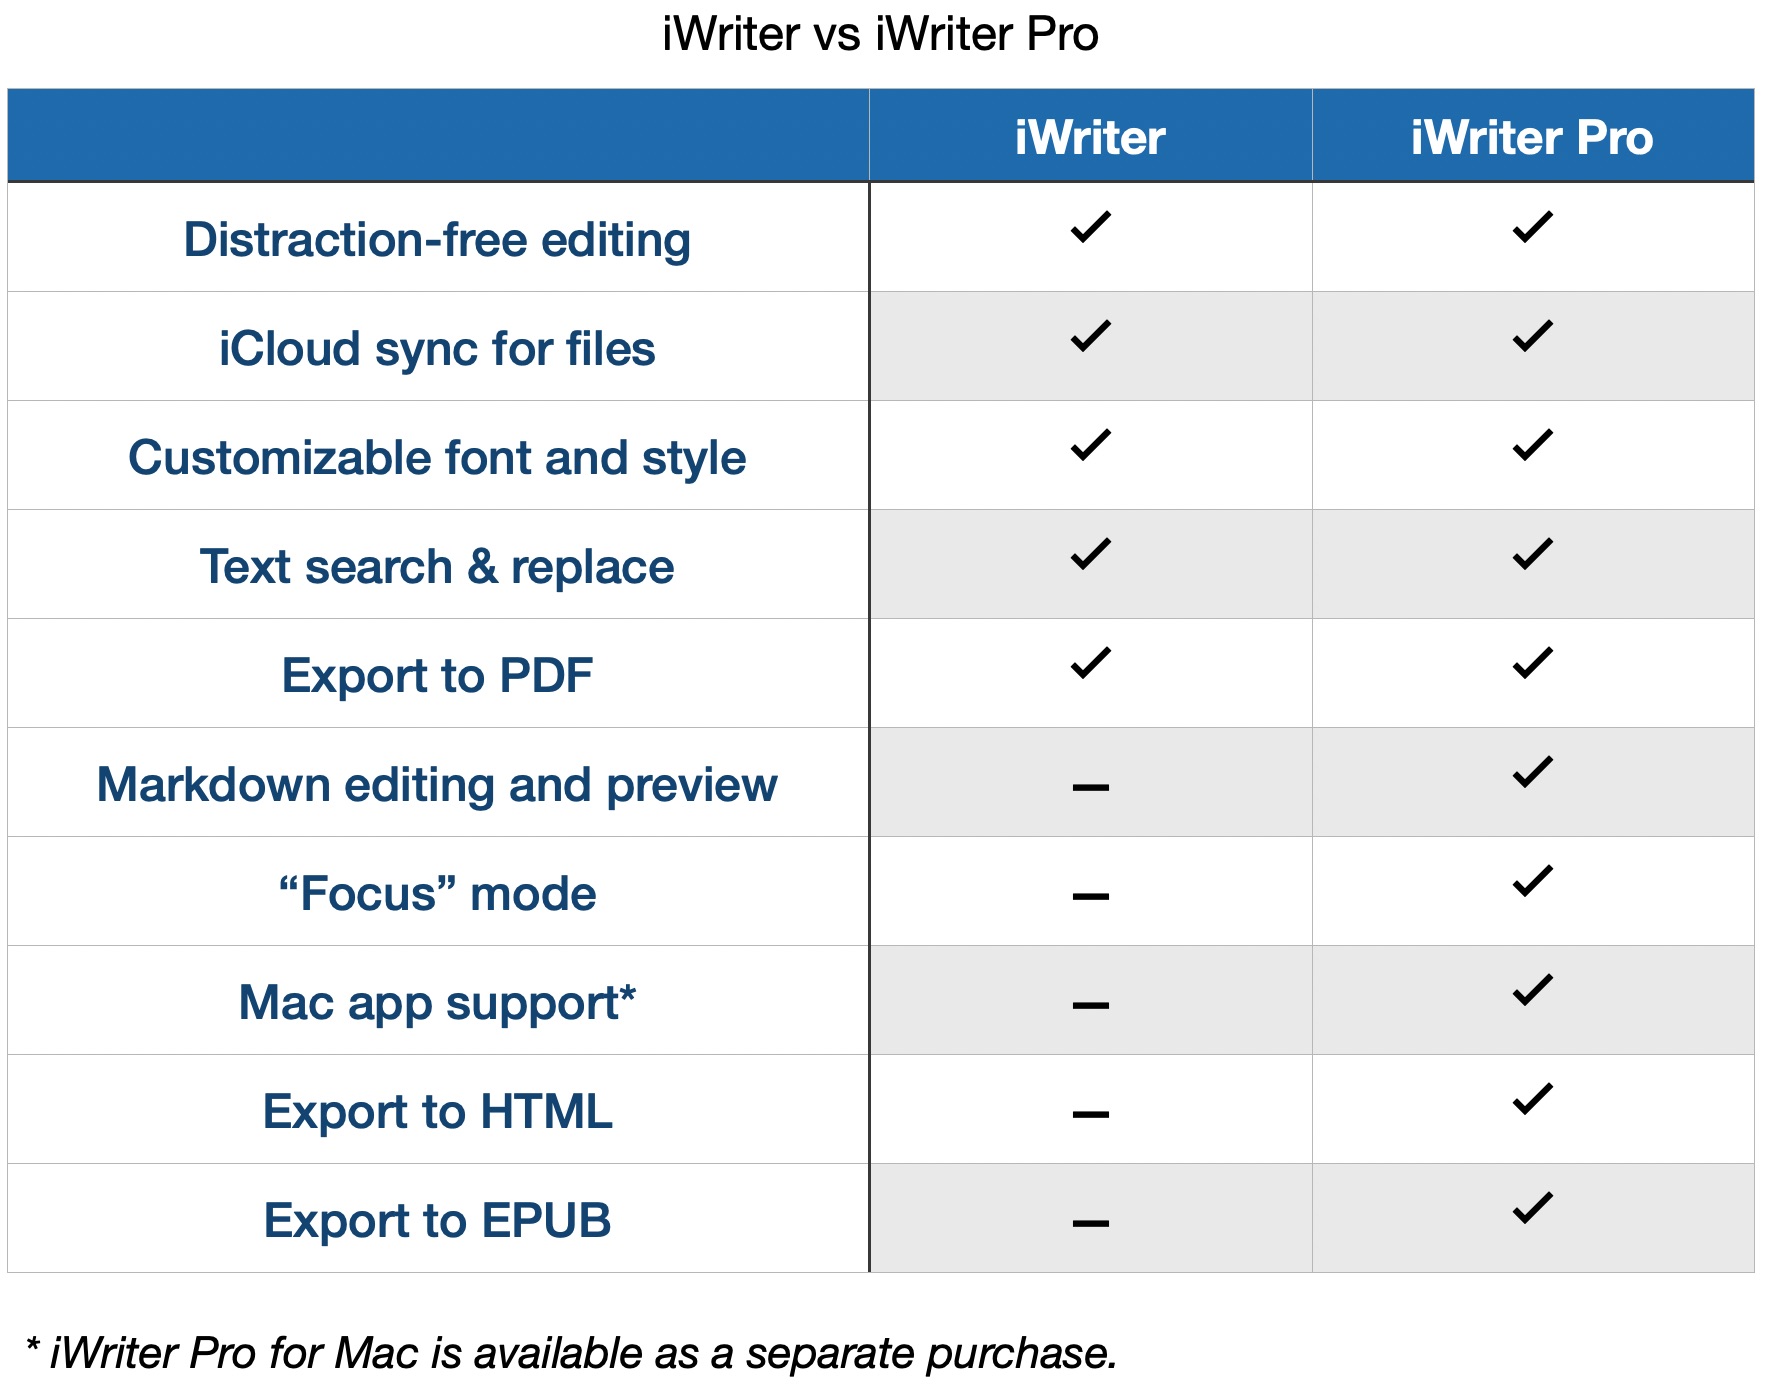 iWriter Pro vs iWriter difference